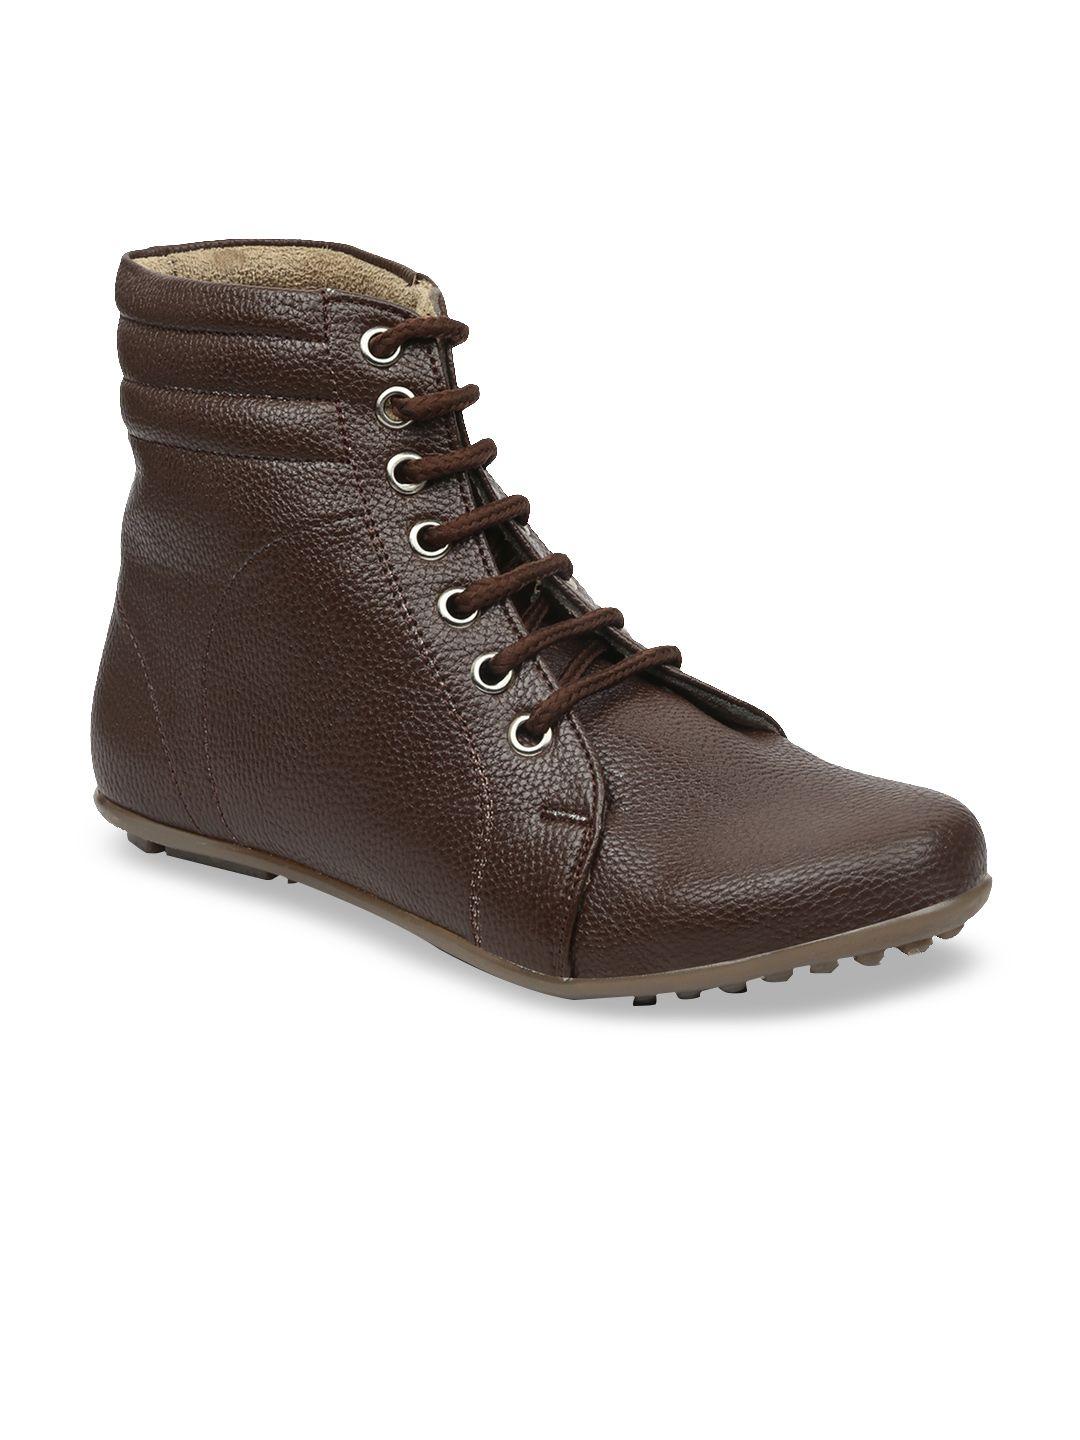 valiosaa women brown solid synthetic mid-top flat boots